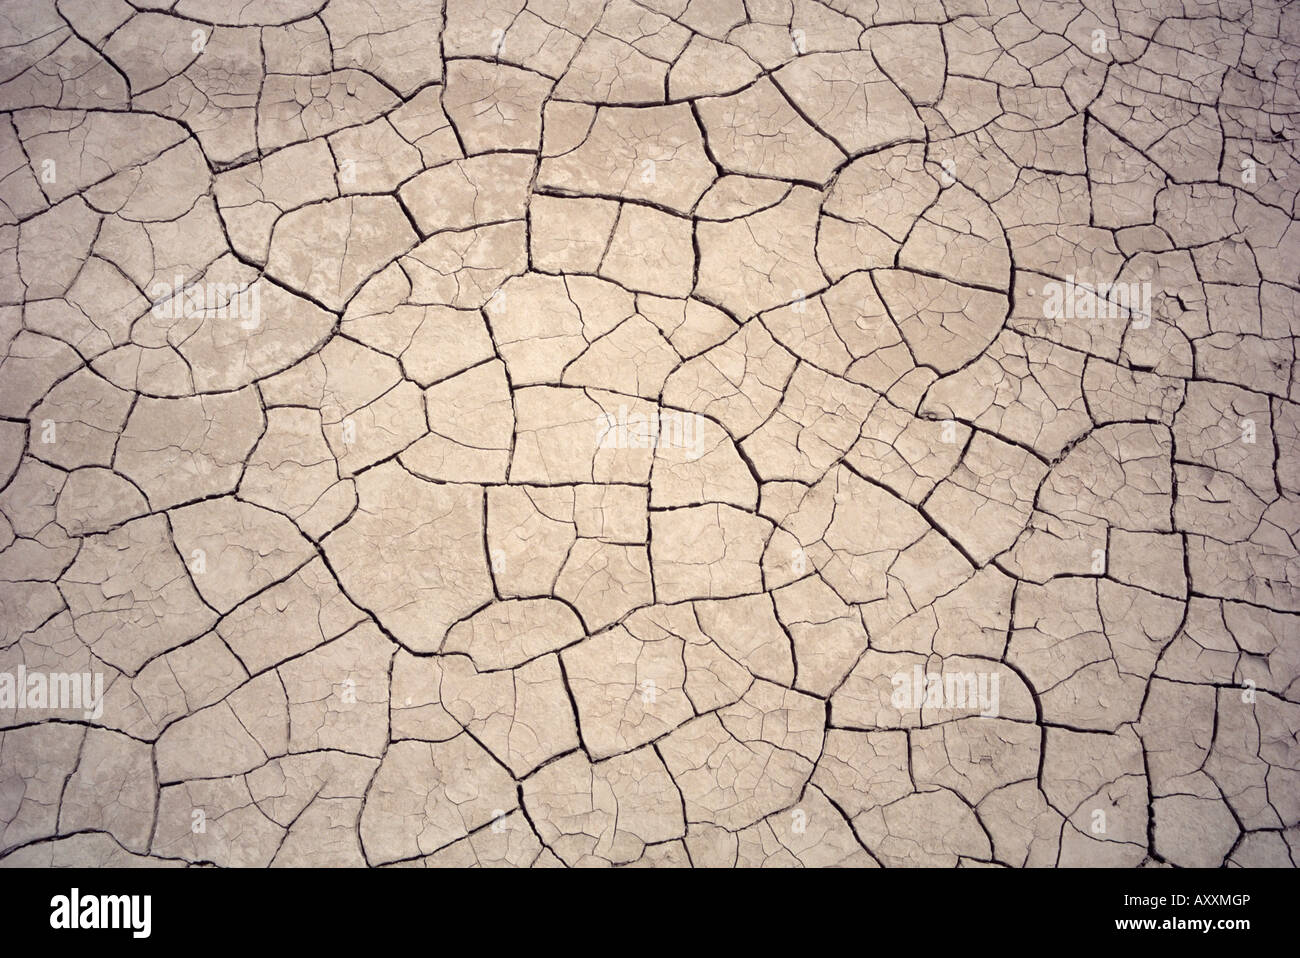 Patterns in mud cracks in drought area Stock Photo